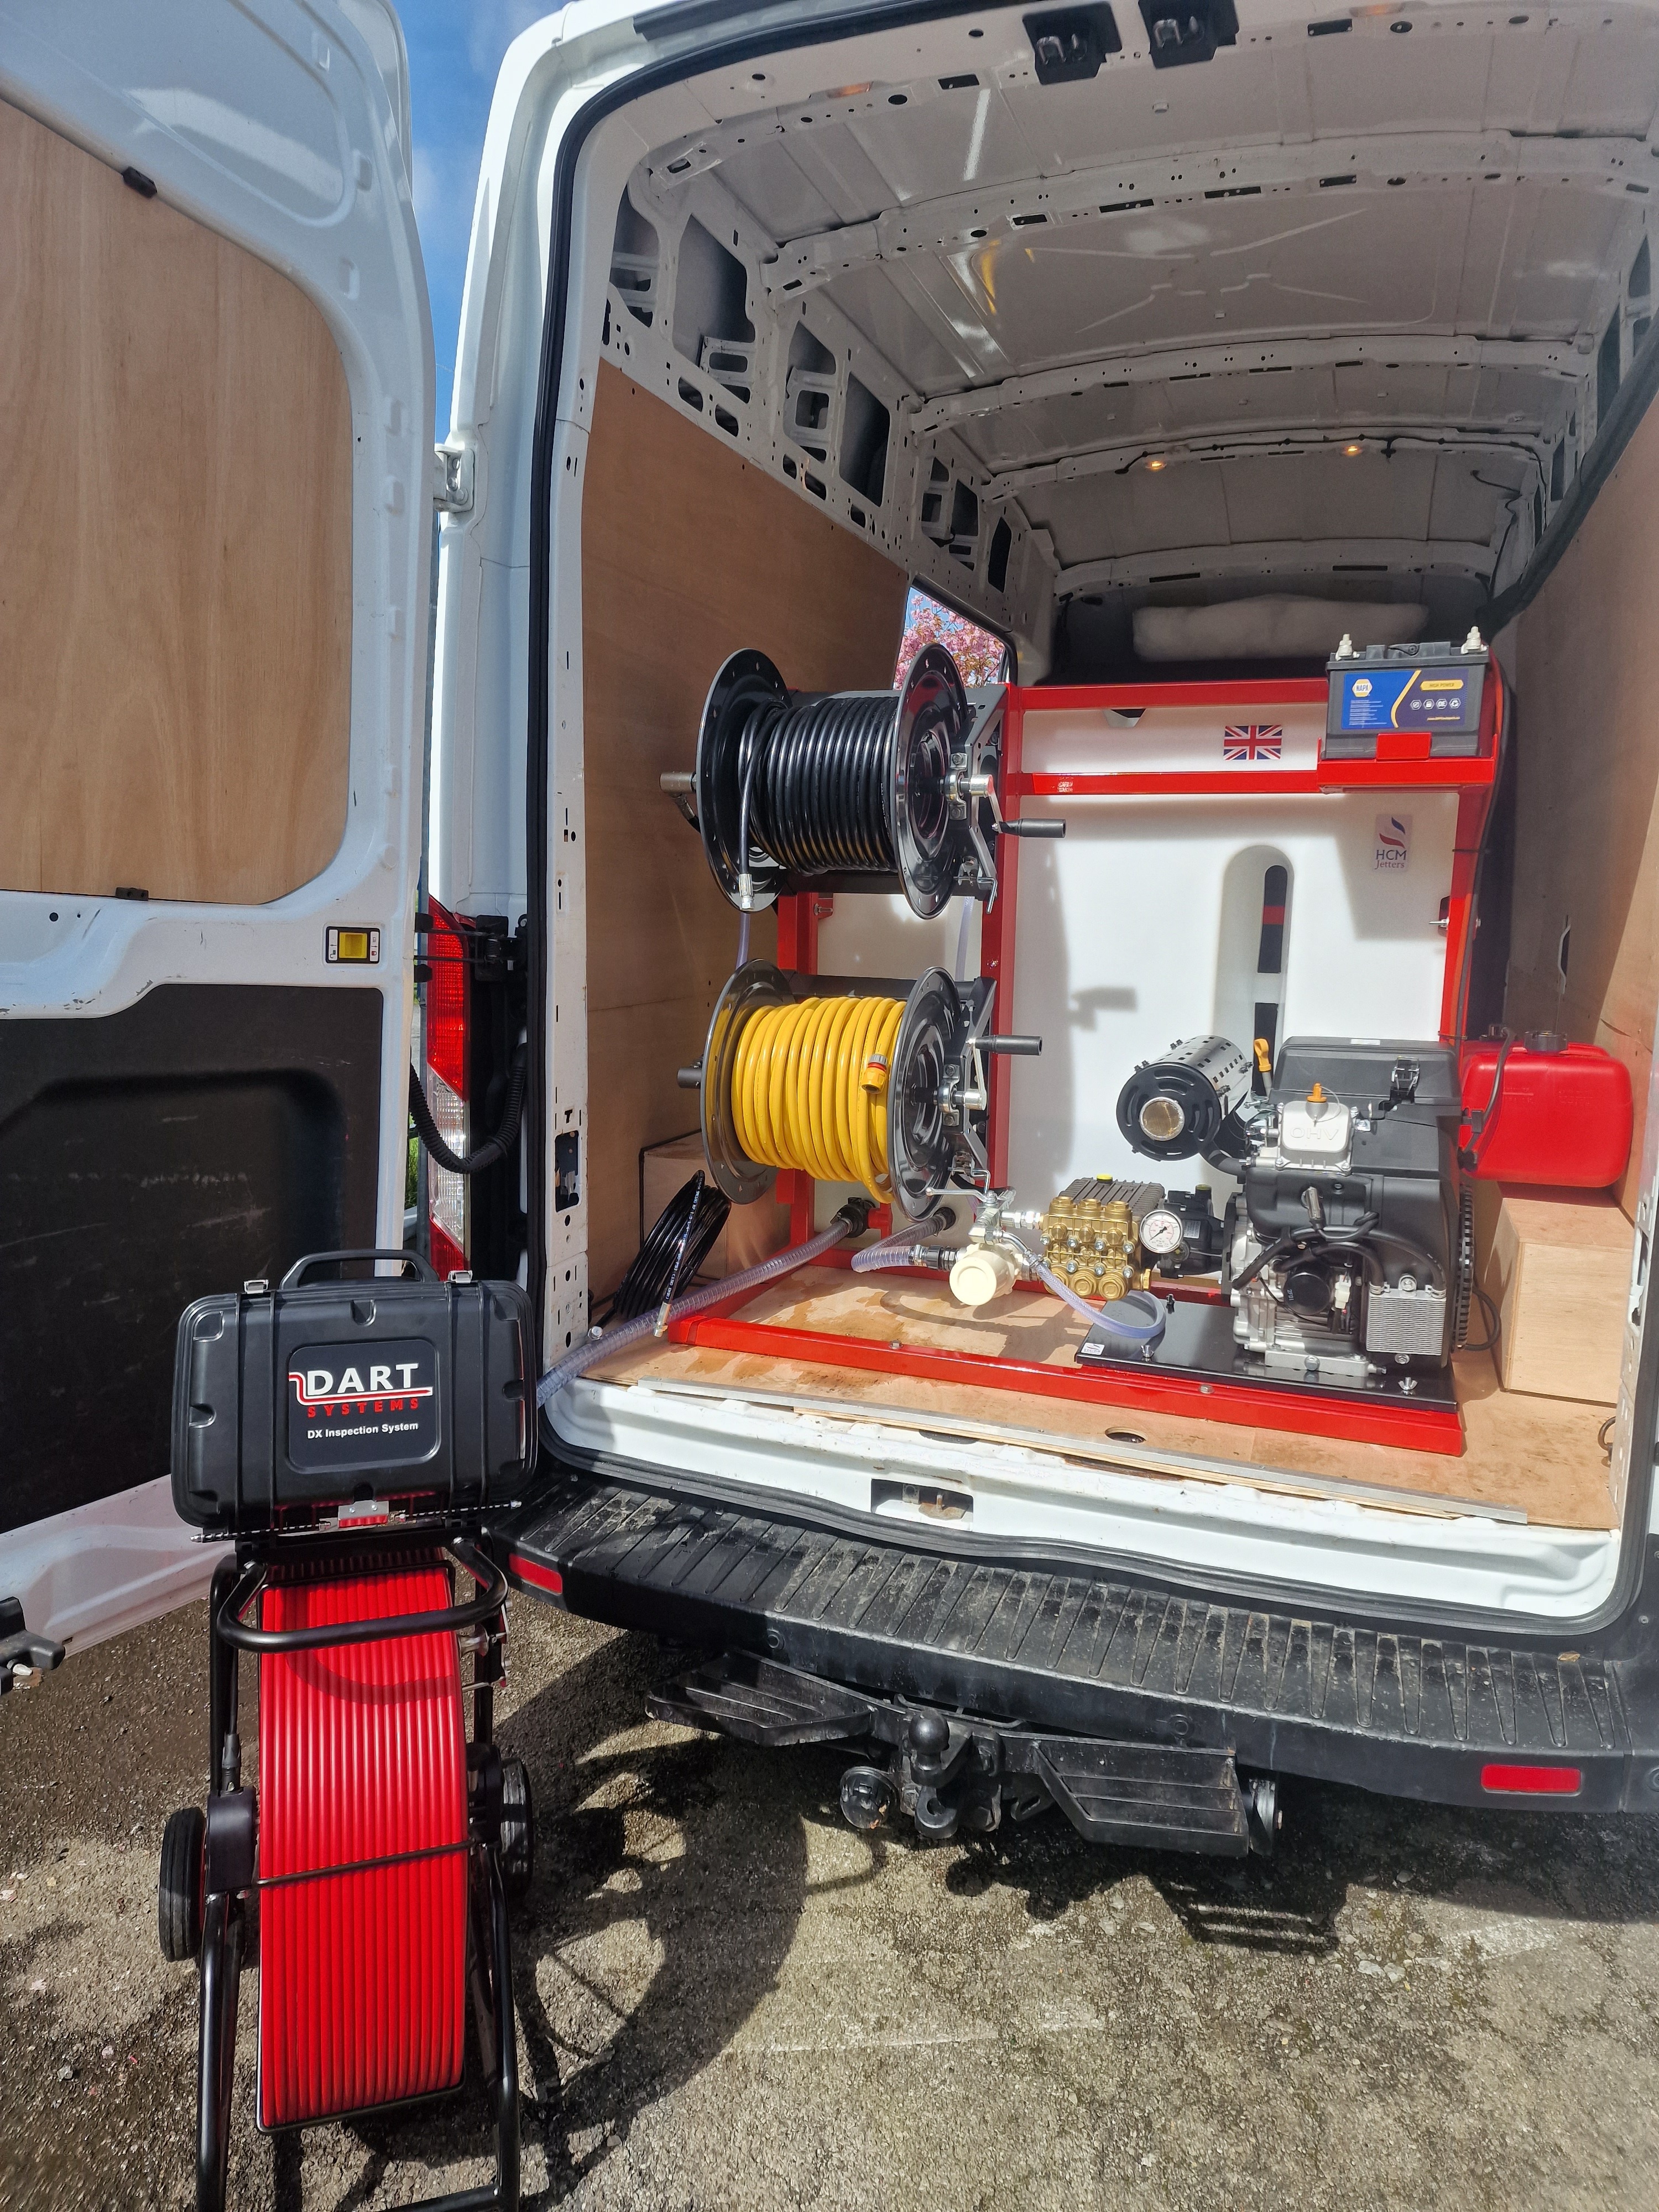 large image of a hcm high pressure drain jetting unit vanpack system fitted into the back of a white drainage van with cctv drain cameras as a package deal for new start up businesses or established businesses looking to upgrade.